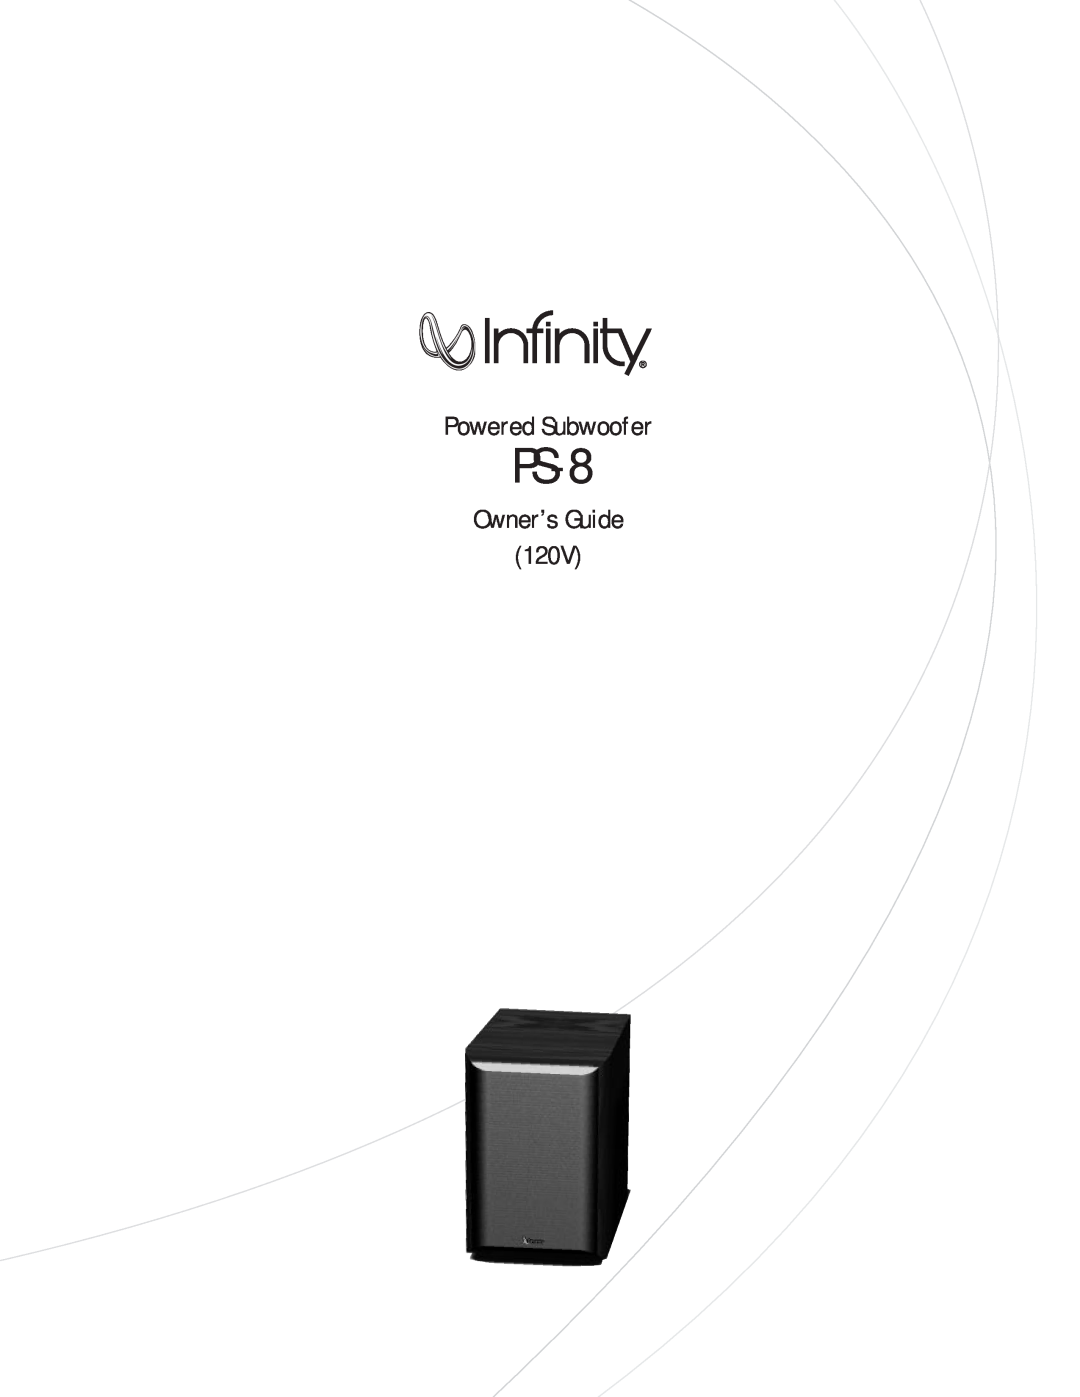 Infinity PS-8 manual Powered Subwoofer, Owner’s Guide 